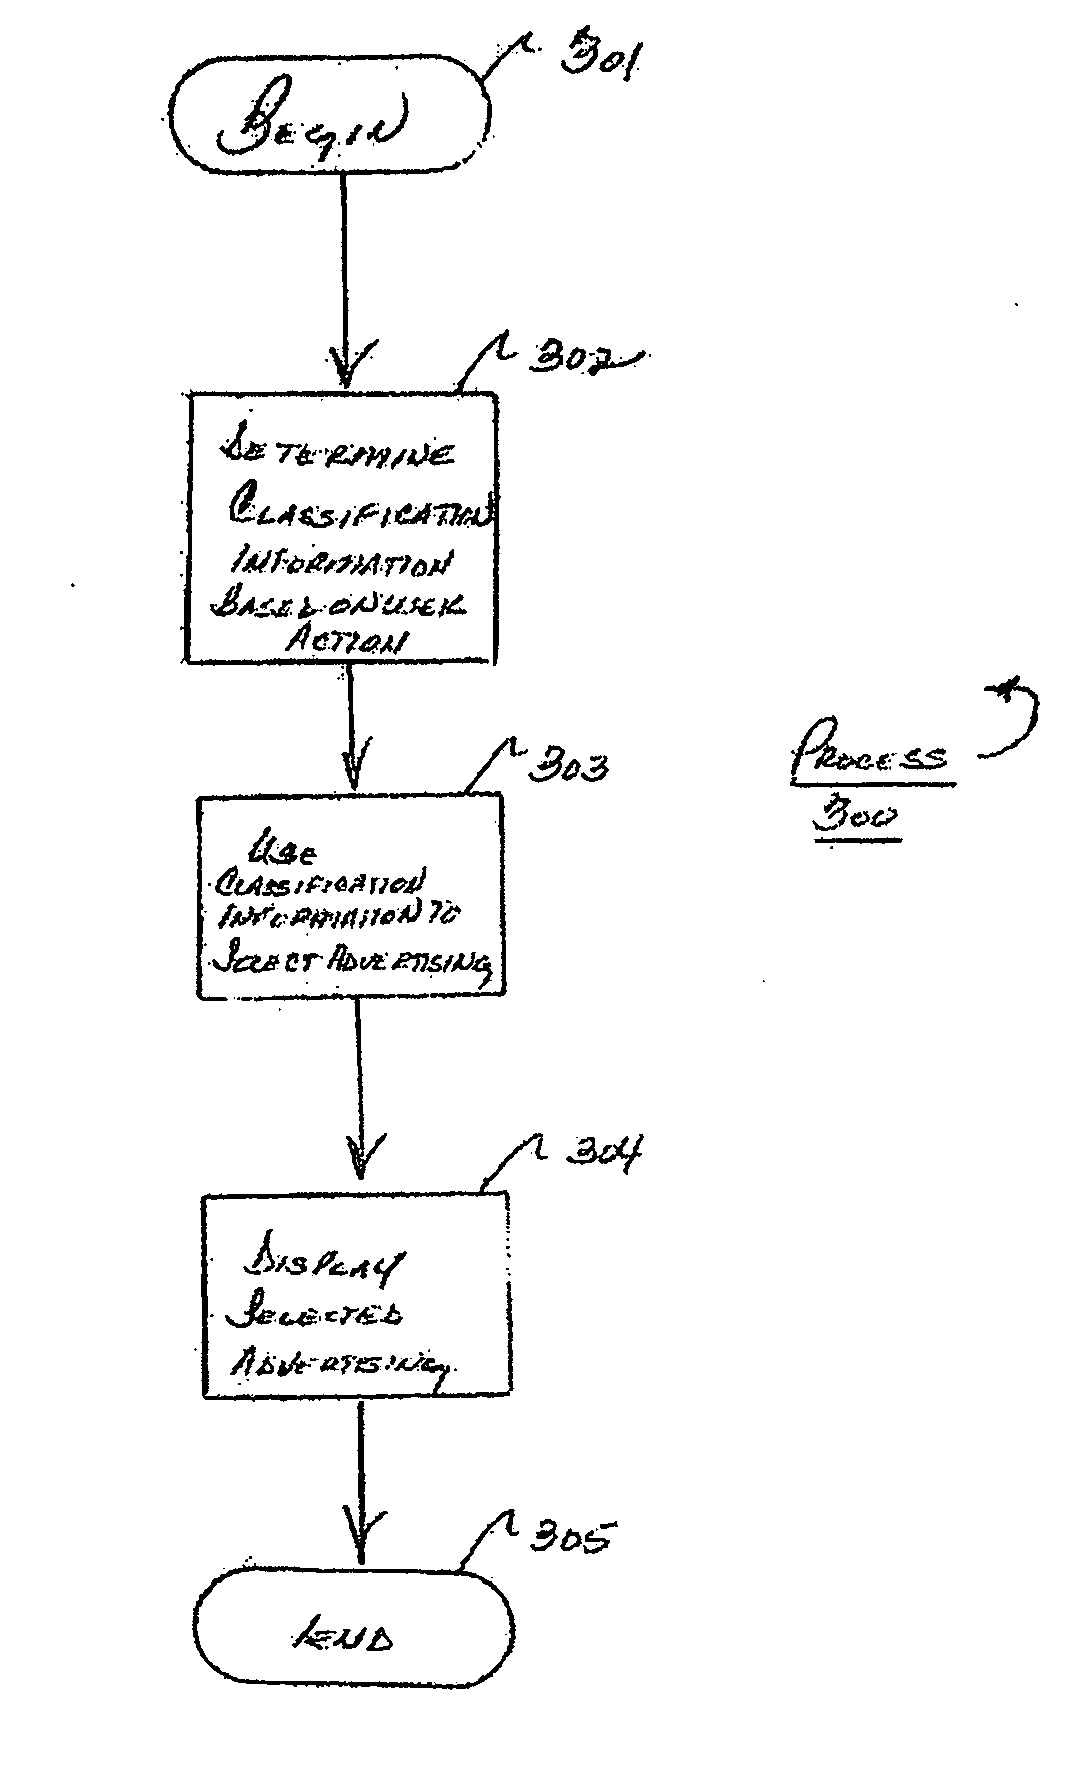 System and method for selecting advertising in a social bookmarking system